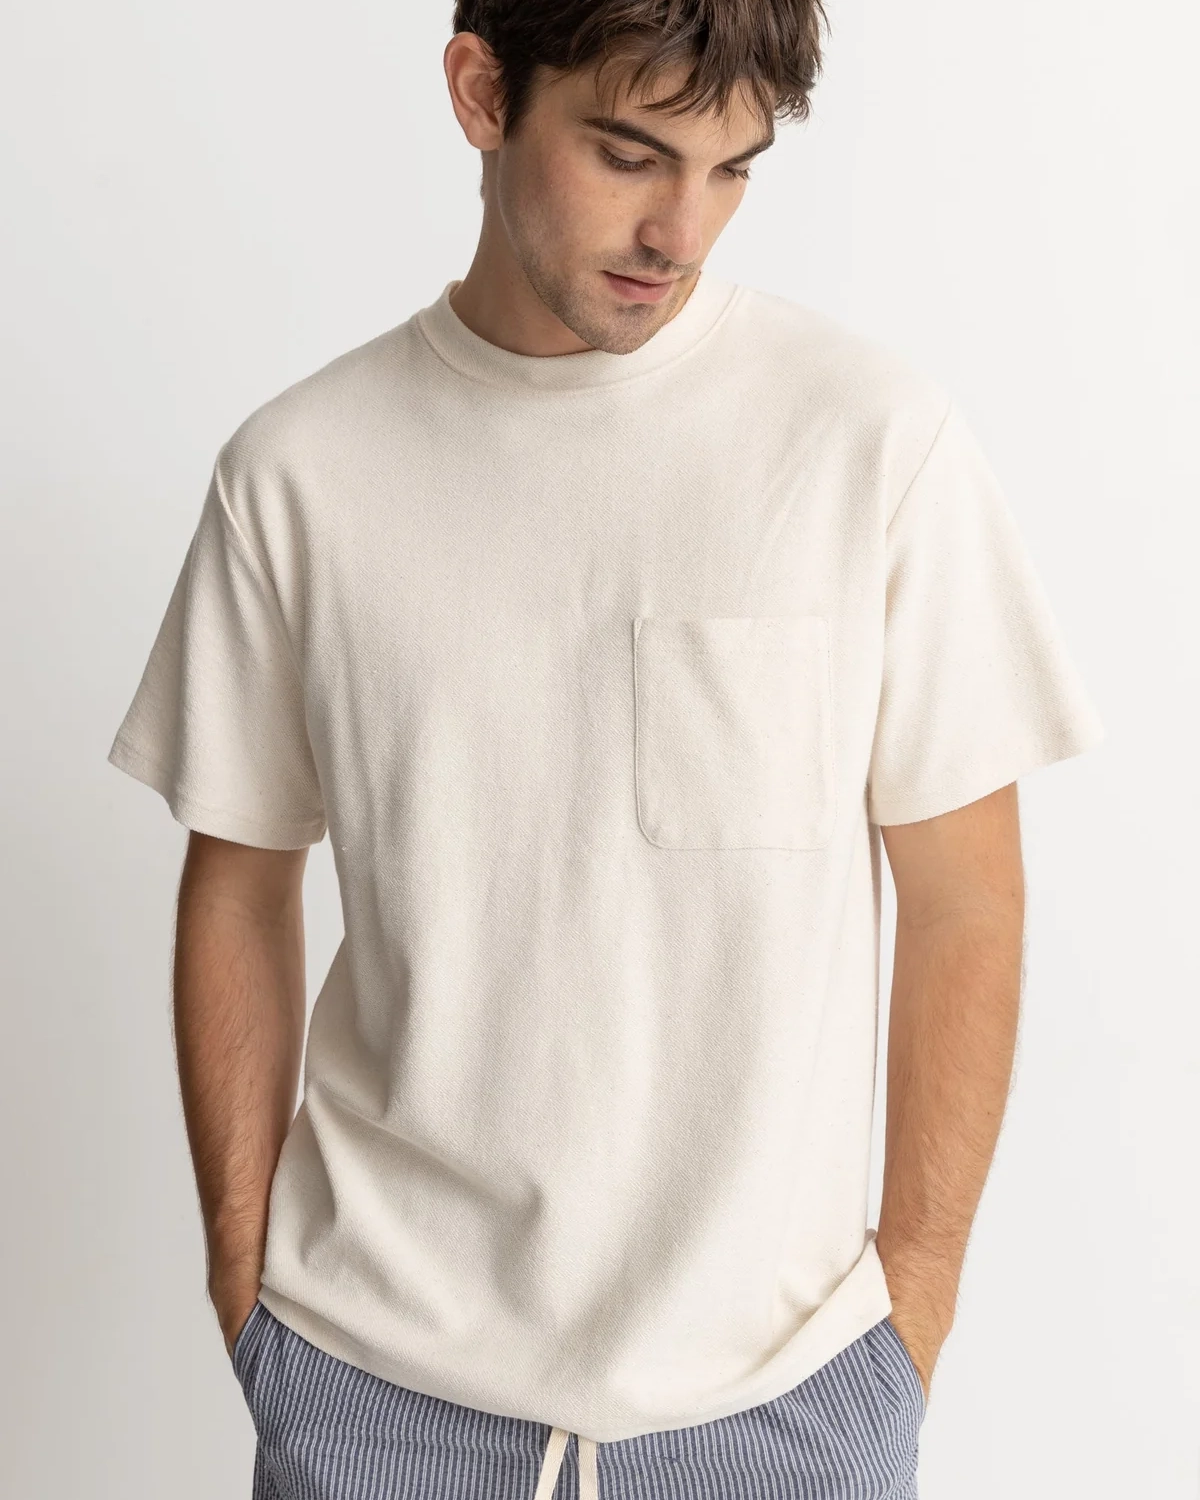 Vintage Terry T-Shirt - Natural - S